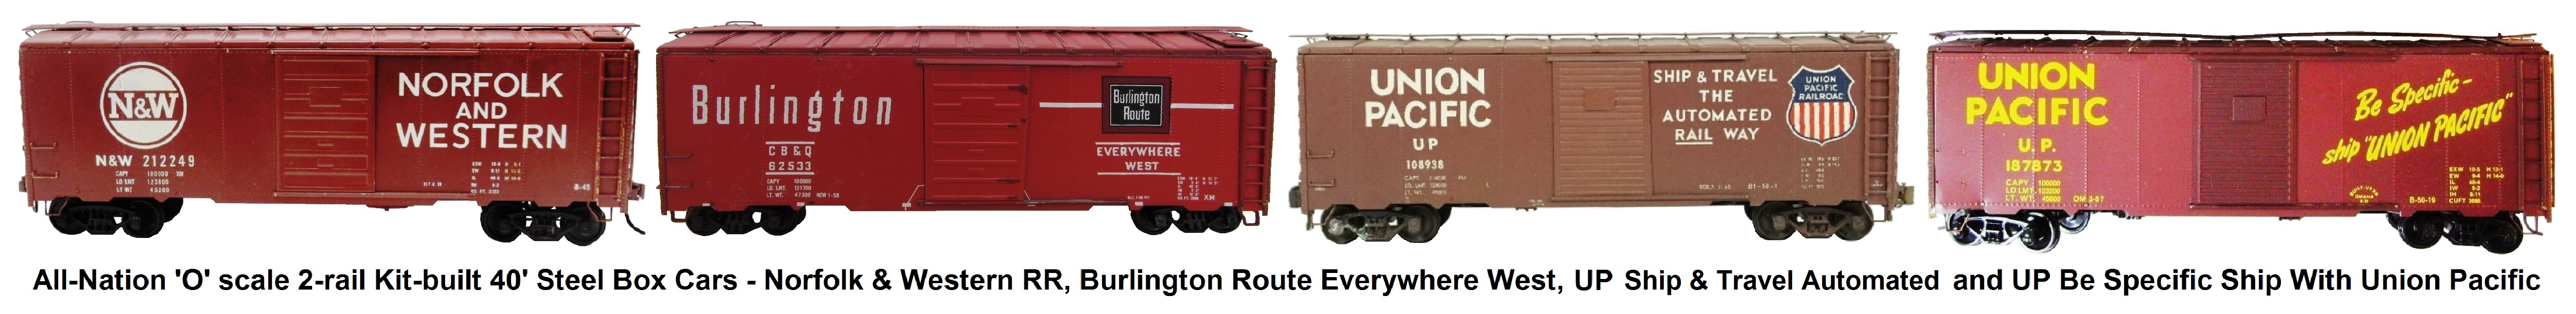 All-Nation 'O' scale 40' Steel Box Cars Kit-built into Norfolk & Western RR, #3663 Burlington Route Everywhere West, #6607 Union Pacific Ship & Travel The Automated Rail Way and #3668 Union Pacific Be Specific Ship With Union Pacific Liveries